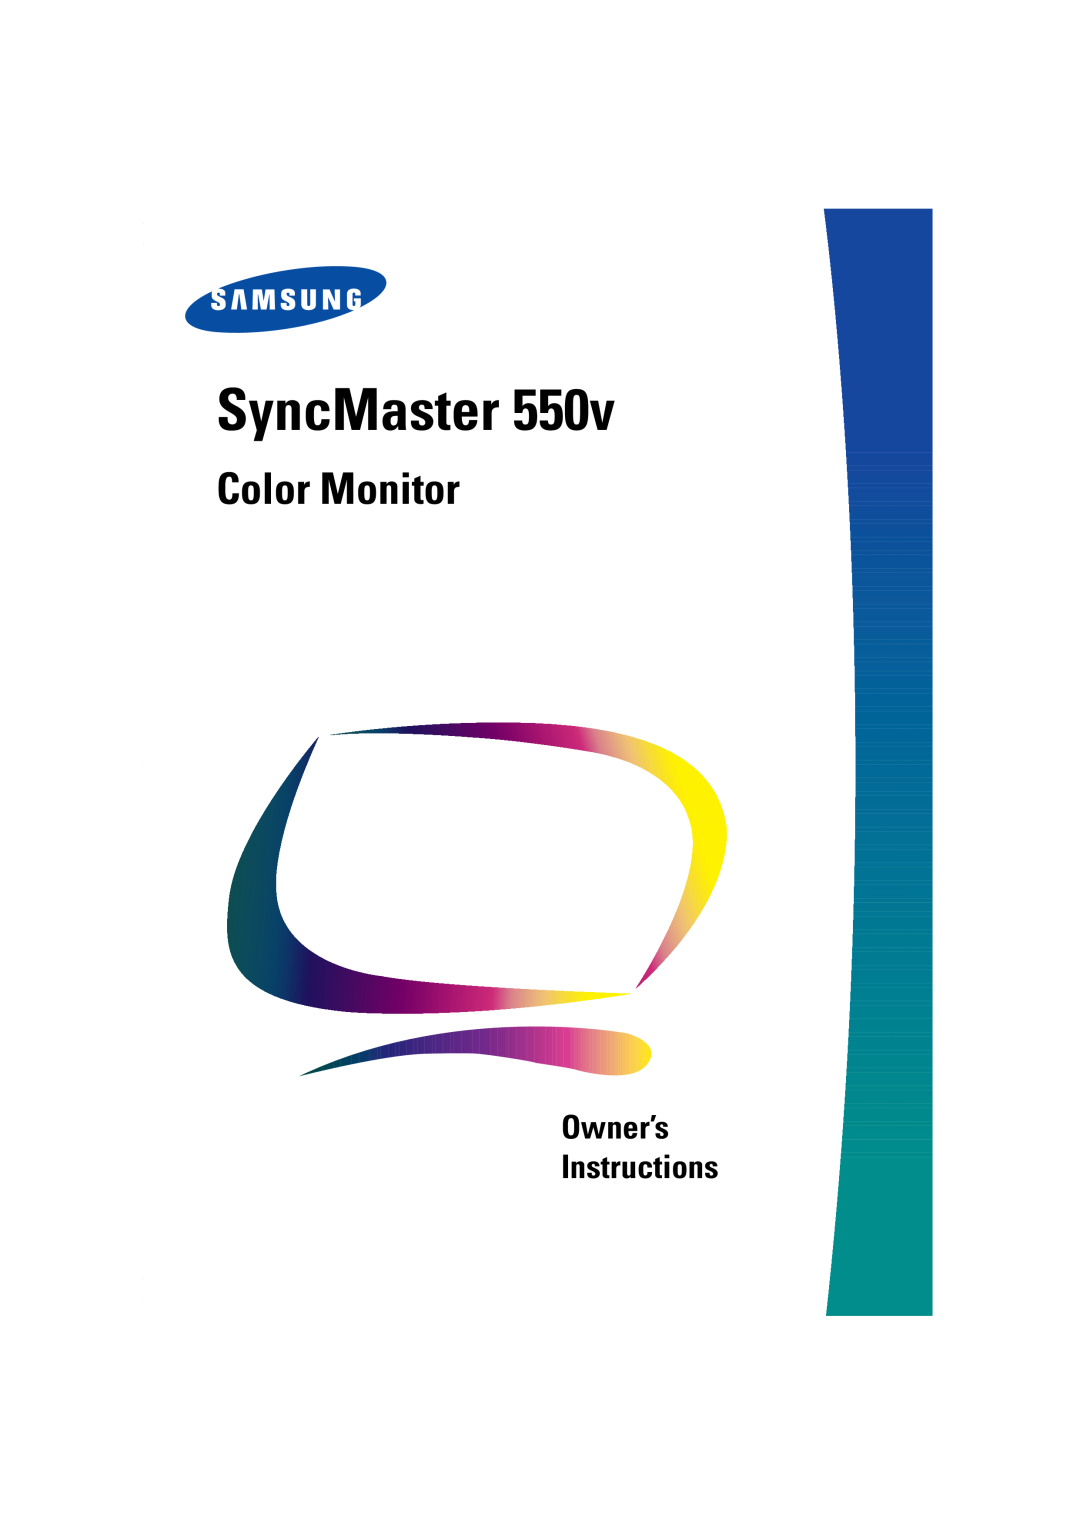 Samsung 550v manual SyncMaster, Color Monitor, Owner’s Instructions 